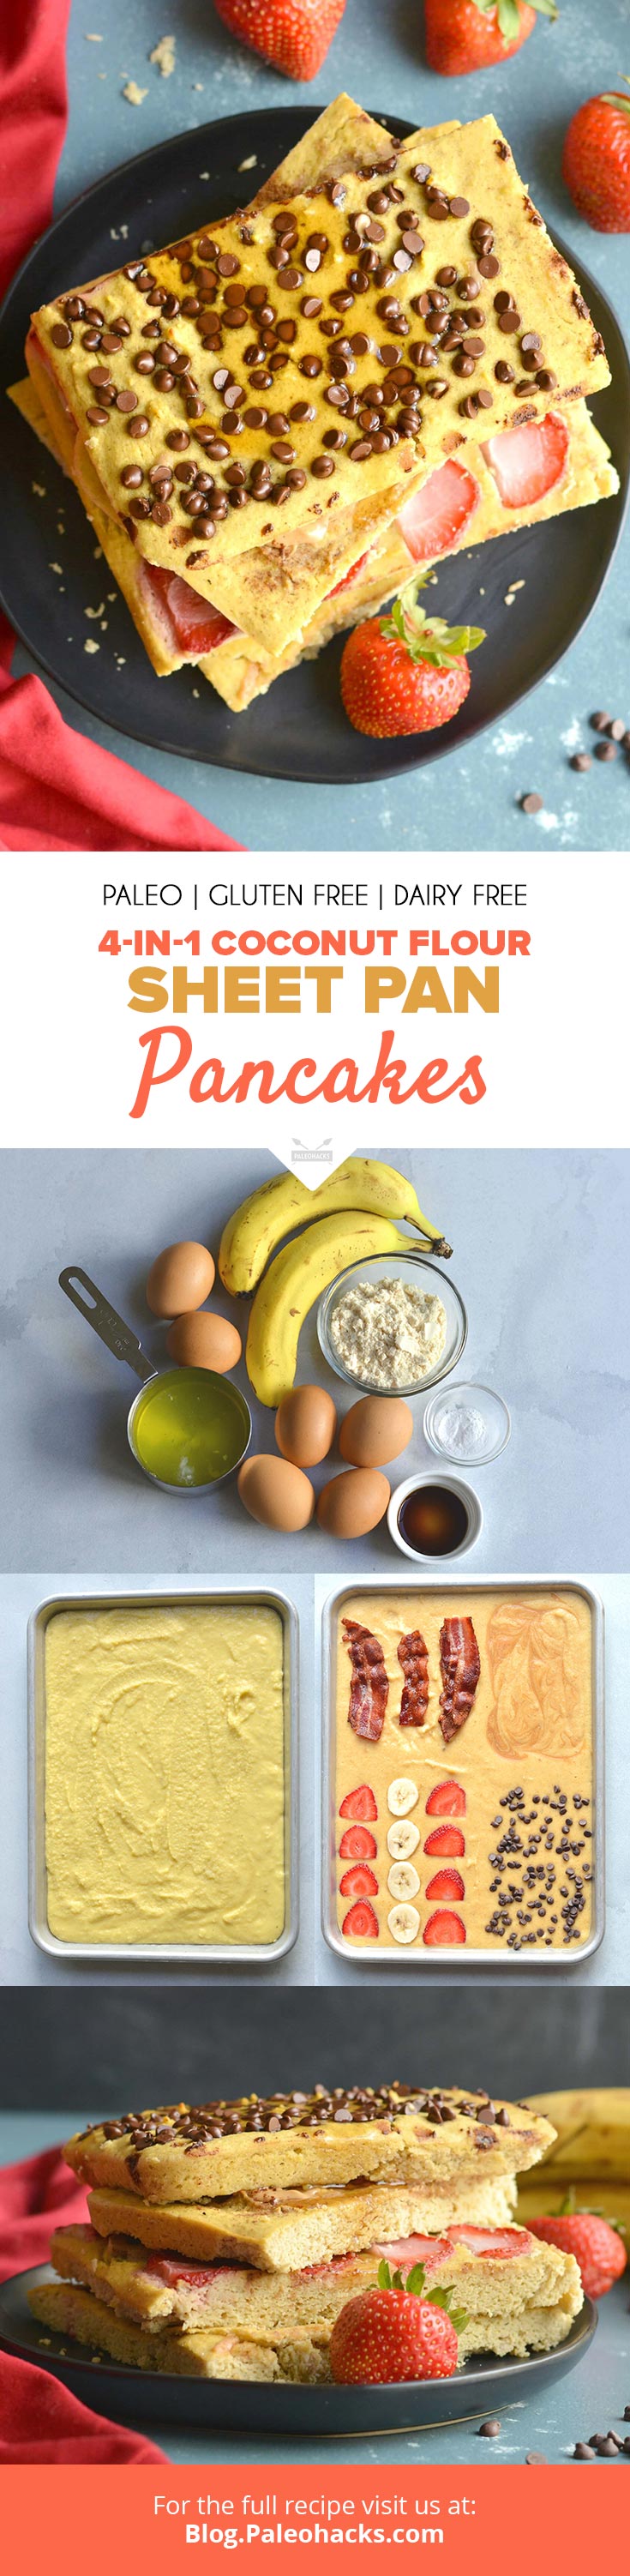 Grab a sheet pan and bake up this 4-in-1 Coconut Flour Pancake recipe to satisfy everyone’s taste buds.